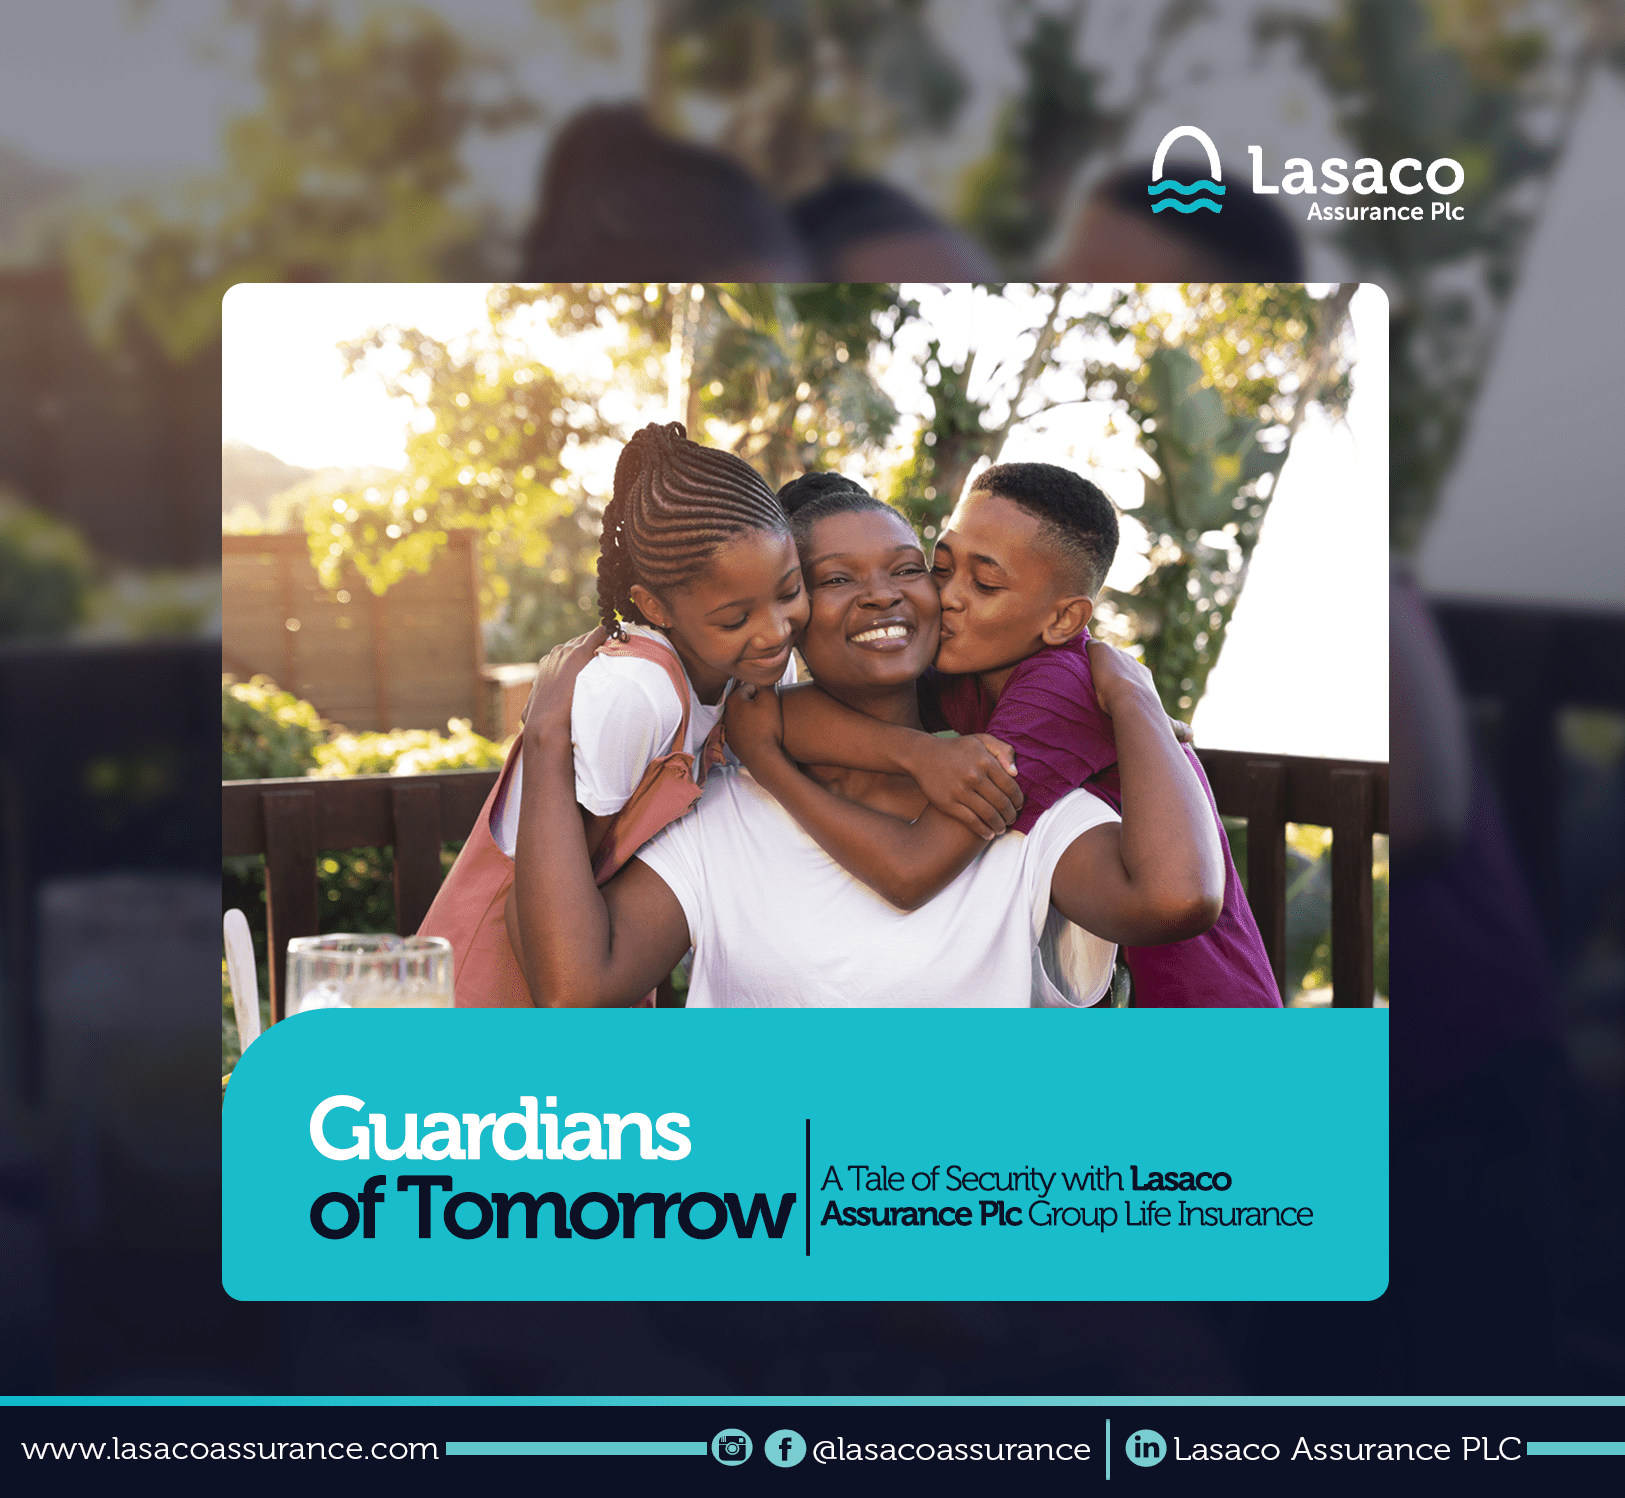 Guardians of Tomorrow: A Tale of Security with Lasaco Assurance Plc Group Life Insurance